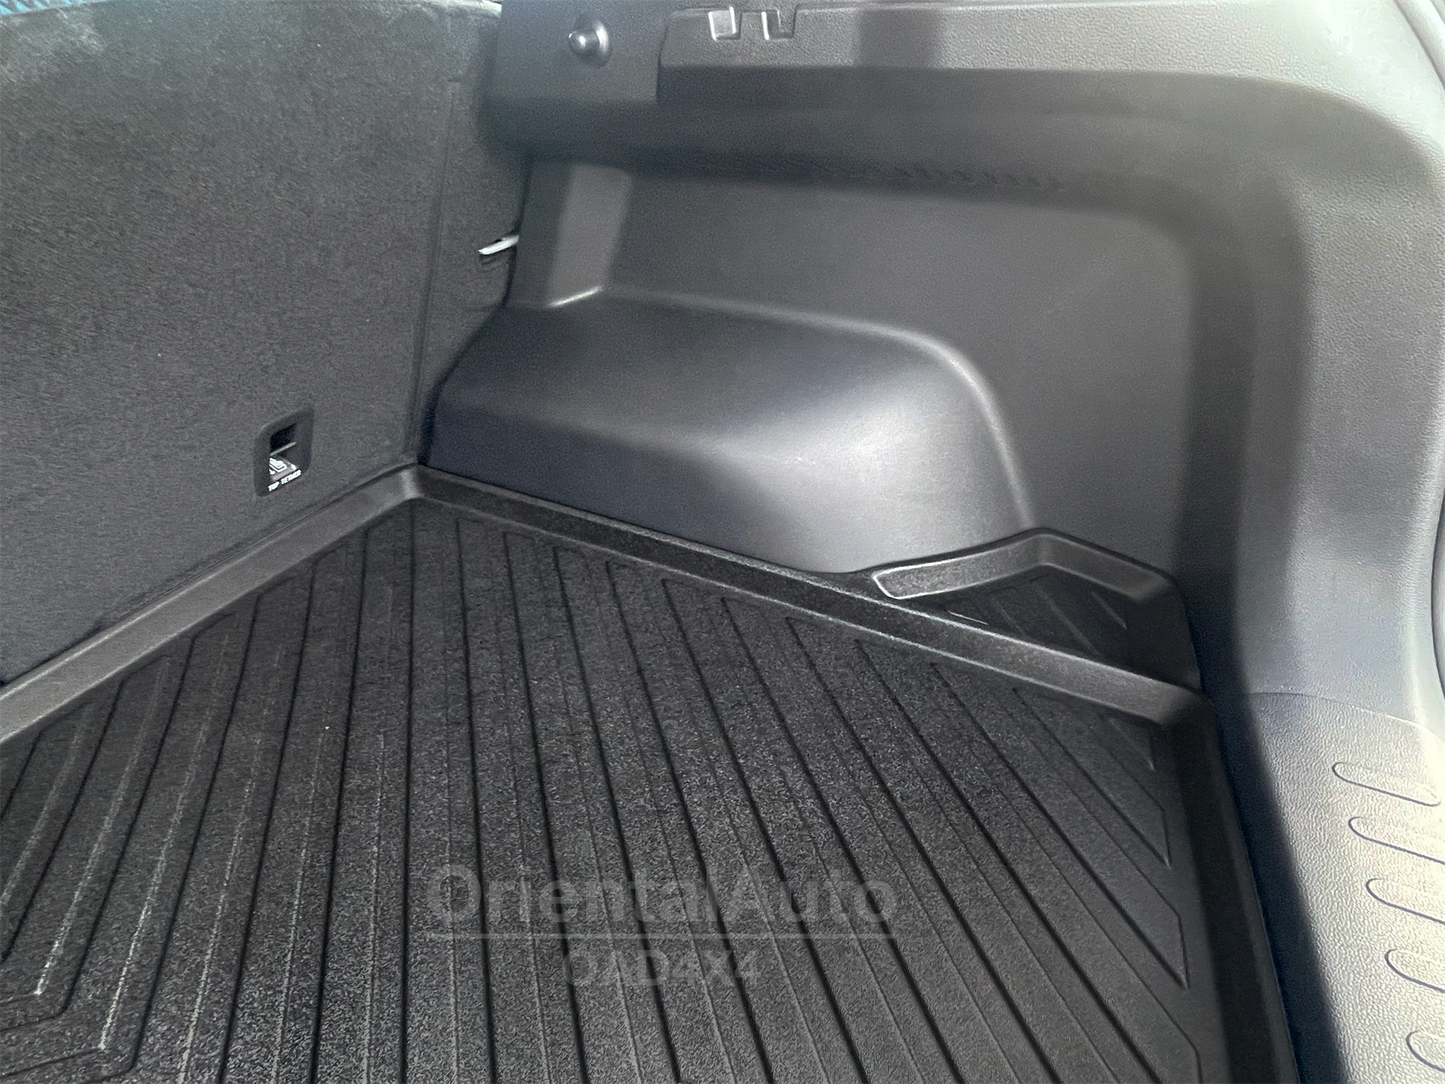 Injection Stainless Weathershields & 3D TPE Cargo Mat For Haval Jolion Petrol 2021-Onwards Weather Shields Window Visor + Boot Mat Liner Trunk Mat